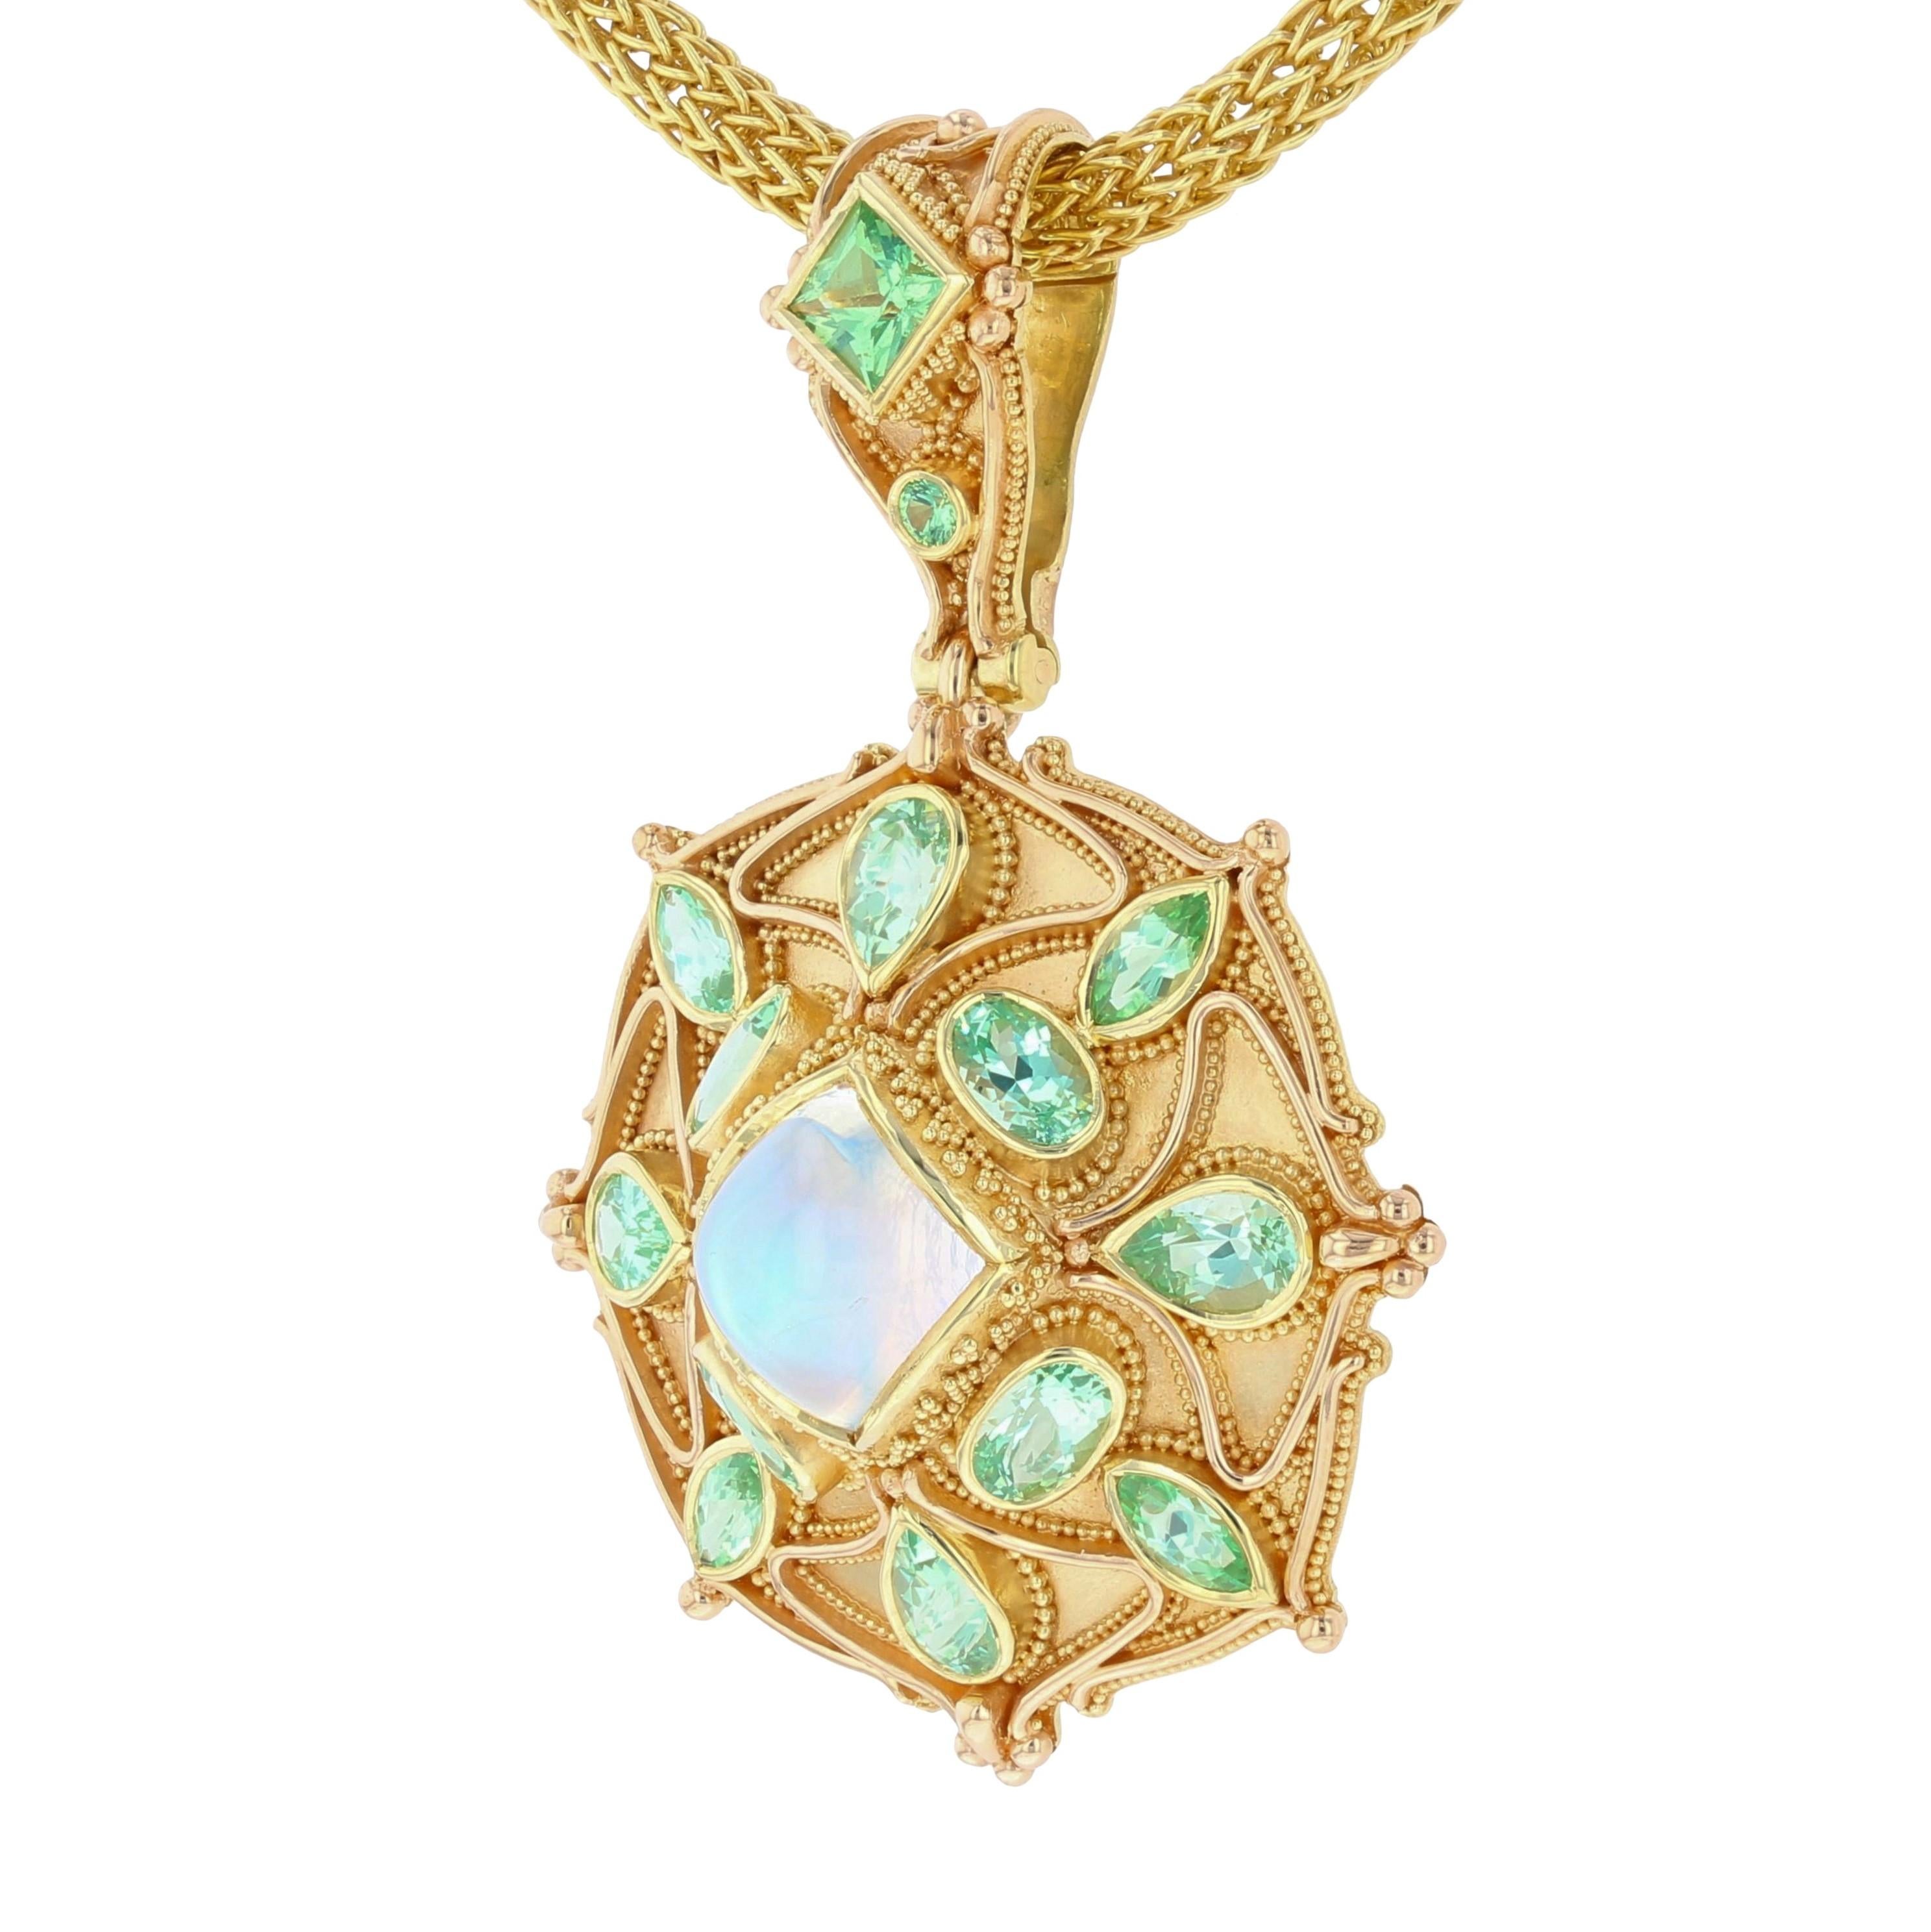 From the Kent Raible one of a kind Masterworks Collection, we bring you the 'Moonstone Mandala' pendant enhancer. At it's center is a flawless multi-colored rainbow moonstone. Accenting the Moonstone are a suite of brilliant mint green Grossular